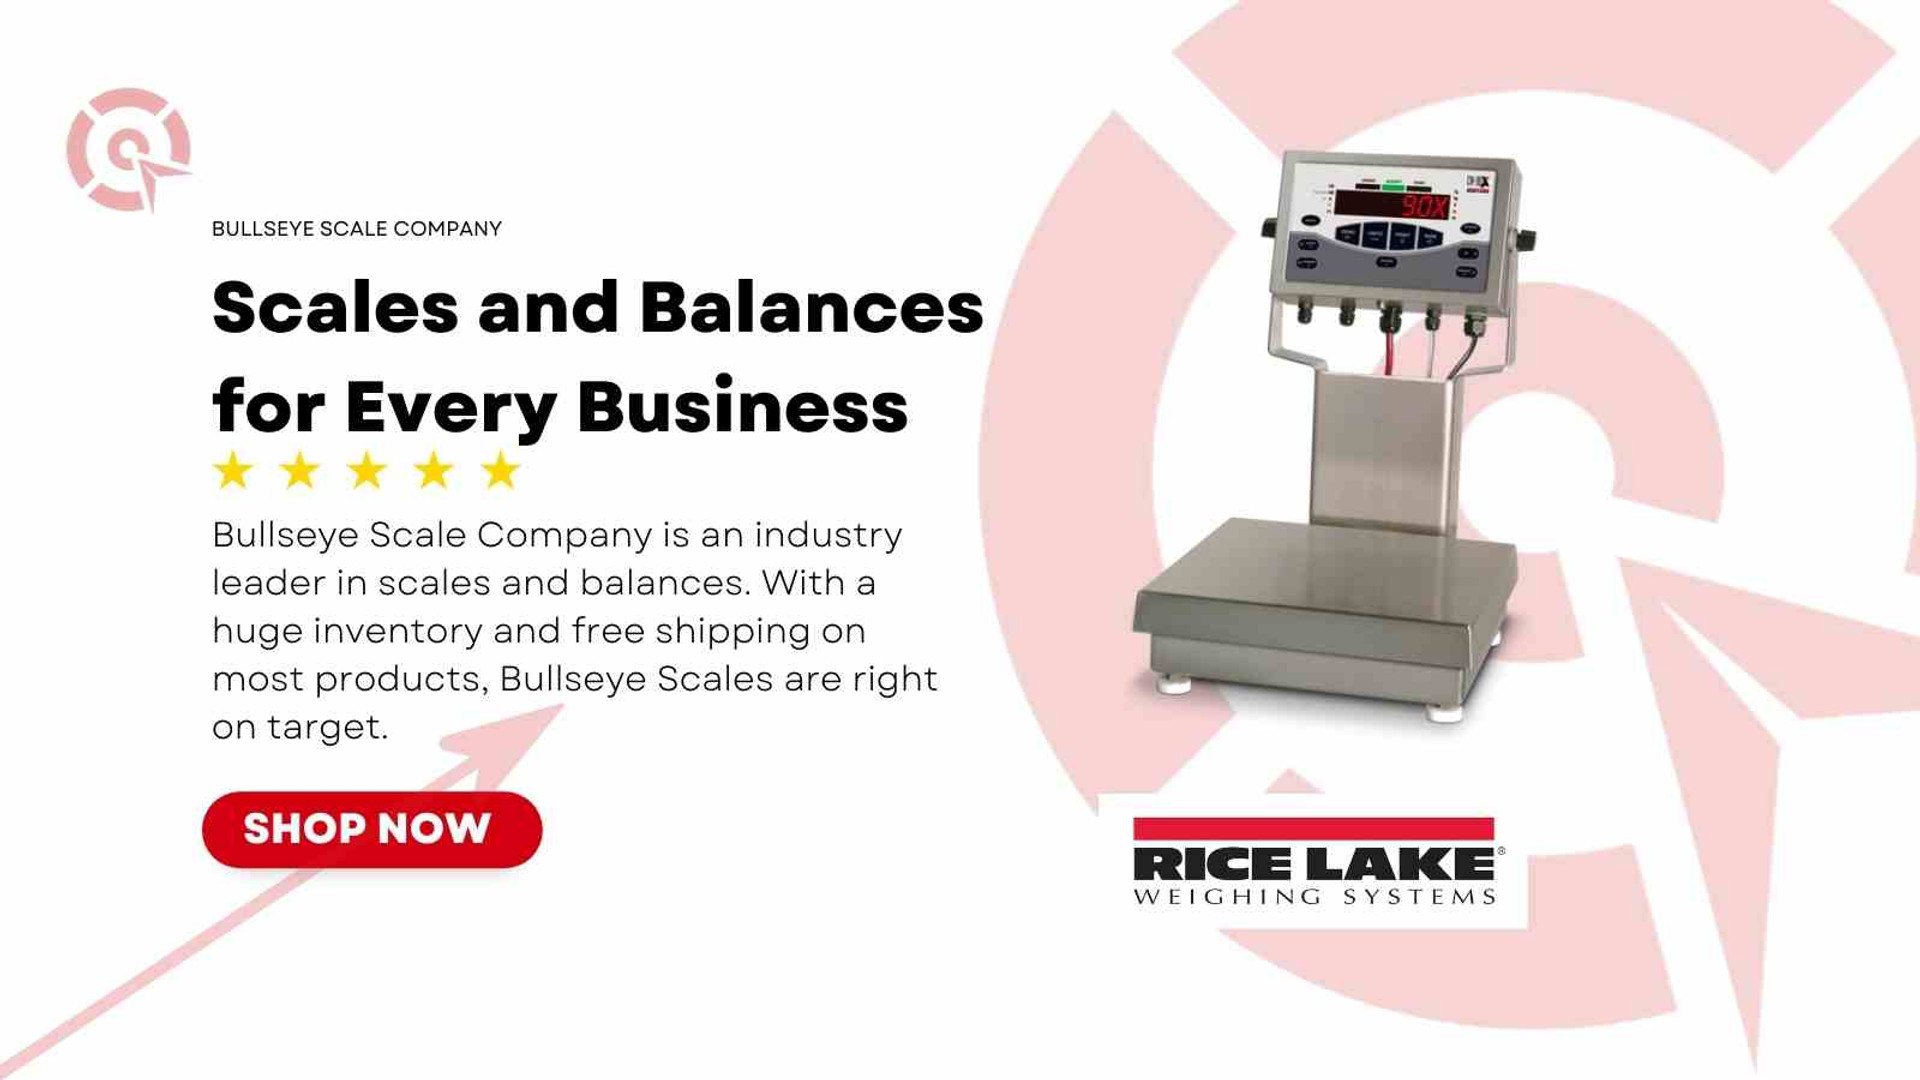 Rice Lake Weighing Systems and Bullseye Scale team up to provide top tier scales and balances